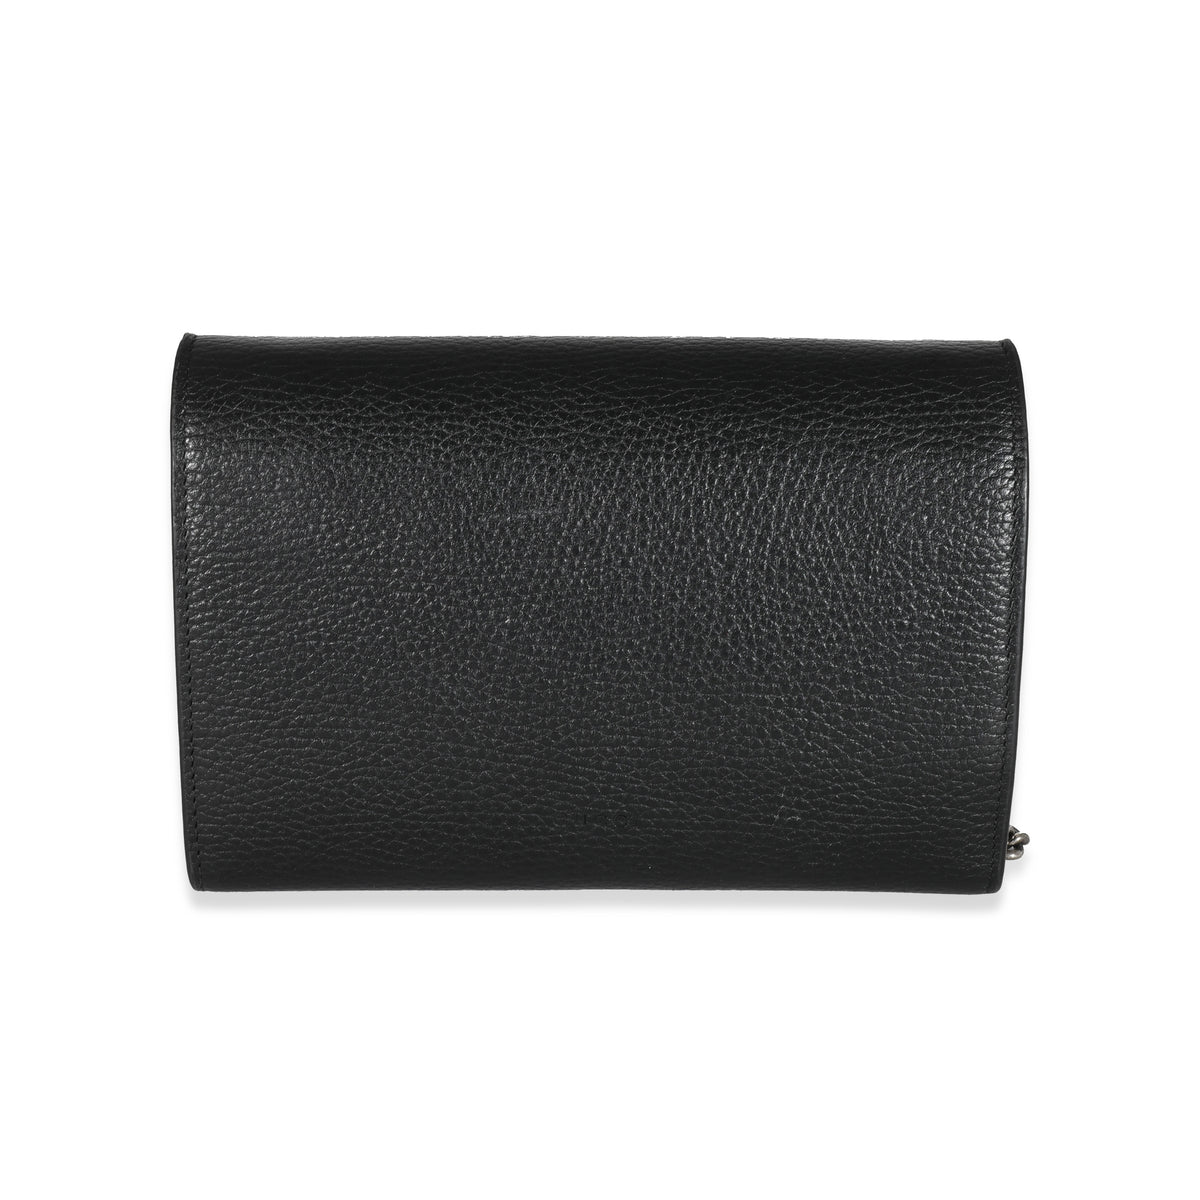 Gucci Black Grained Leather Crystal Dionysus Chain Wallet, myGemma